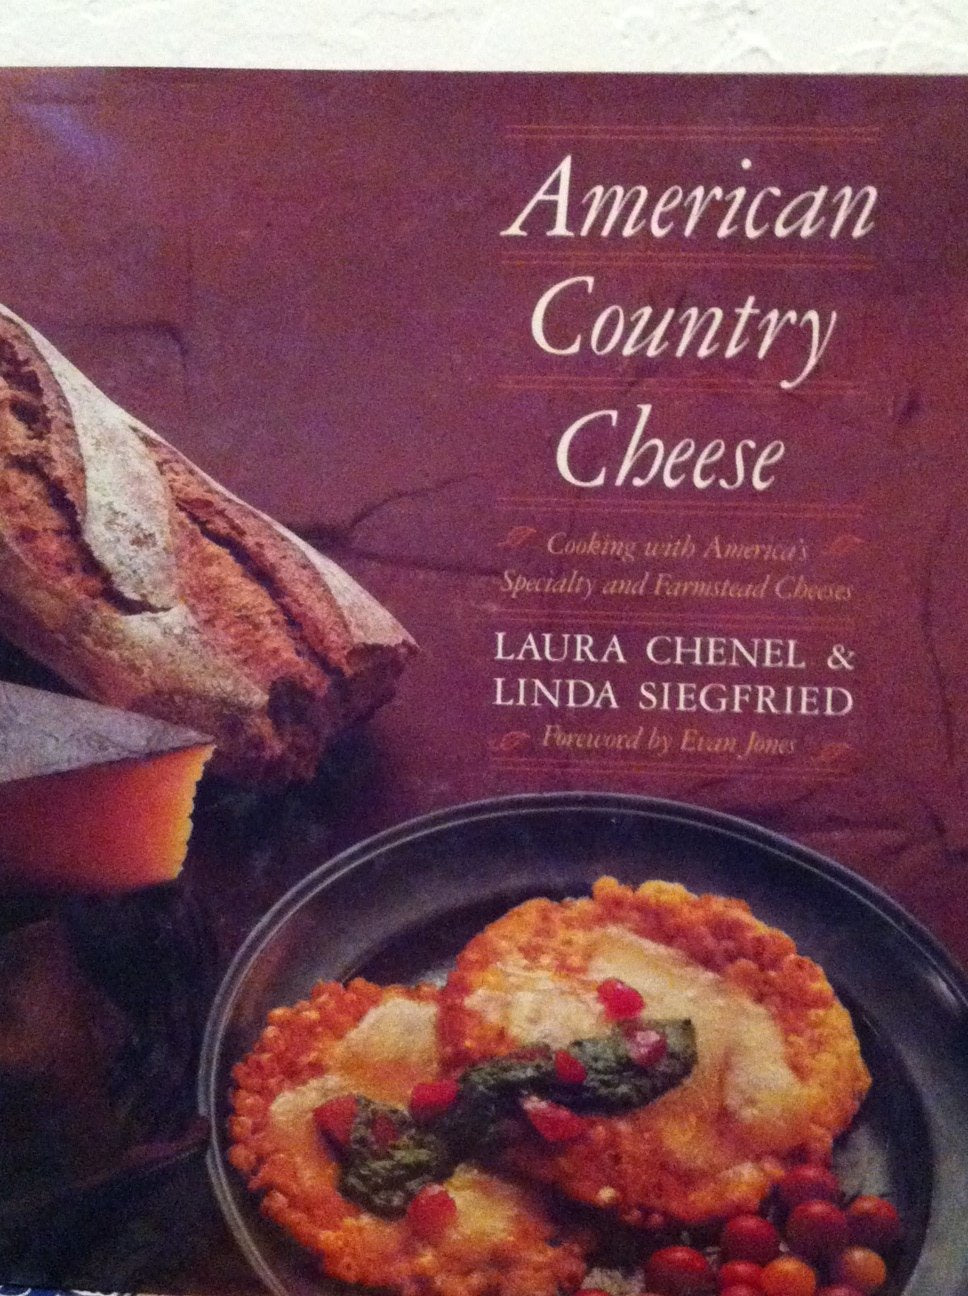 *Sale* American Country Cheese: Cooking With America's Specialty and Farmstead Cheeses (Laura Chenel, Linda Siegfried)